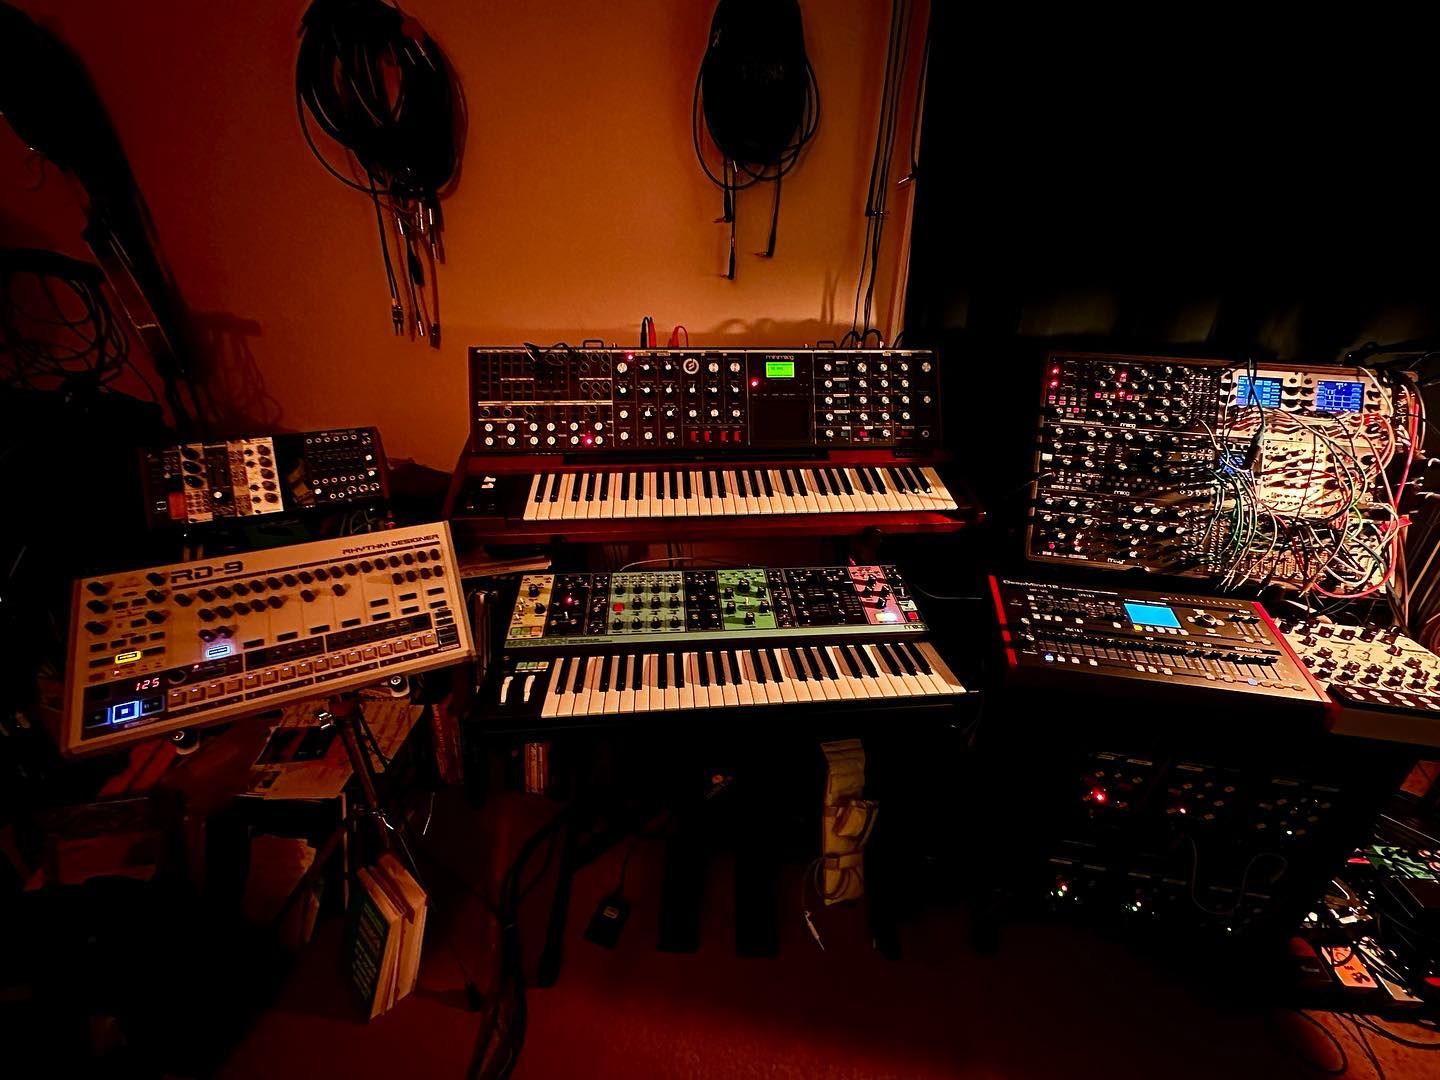 Organizing my synths is like playing Tetris, except the blocks keep multiplying, and you can never clear a line.